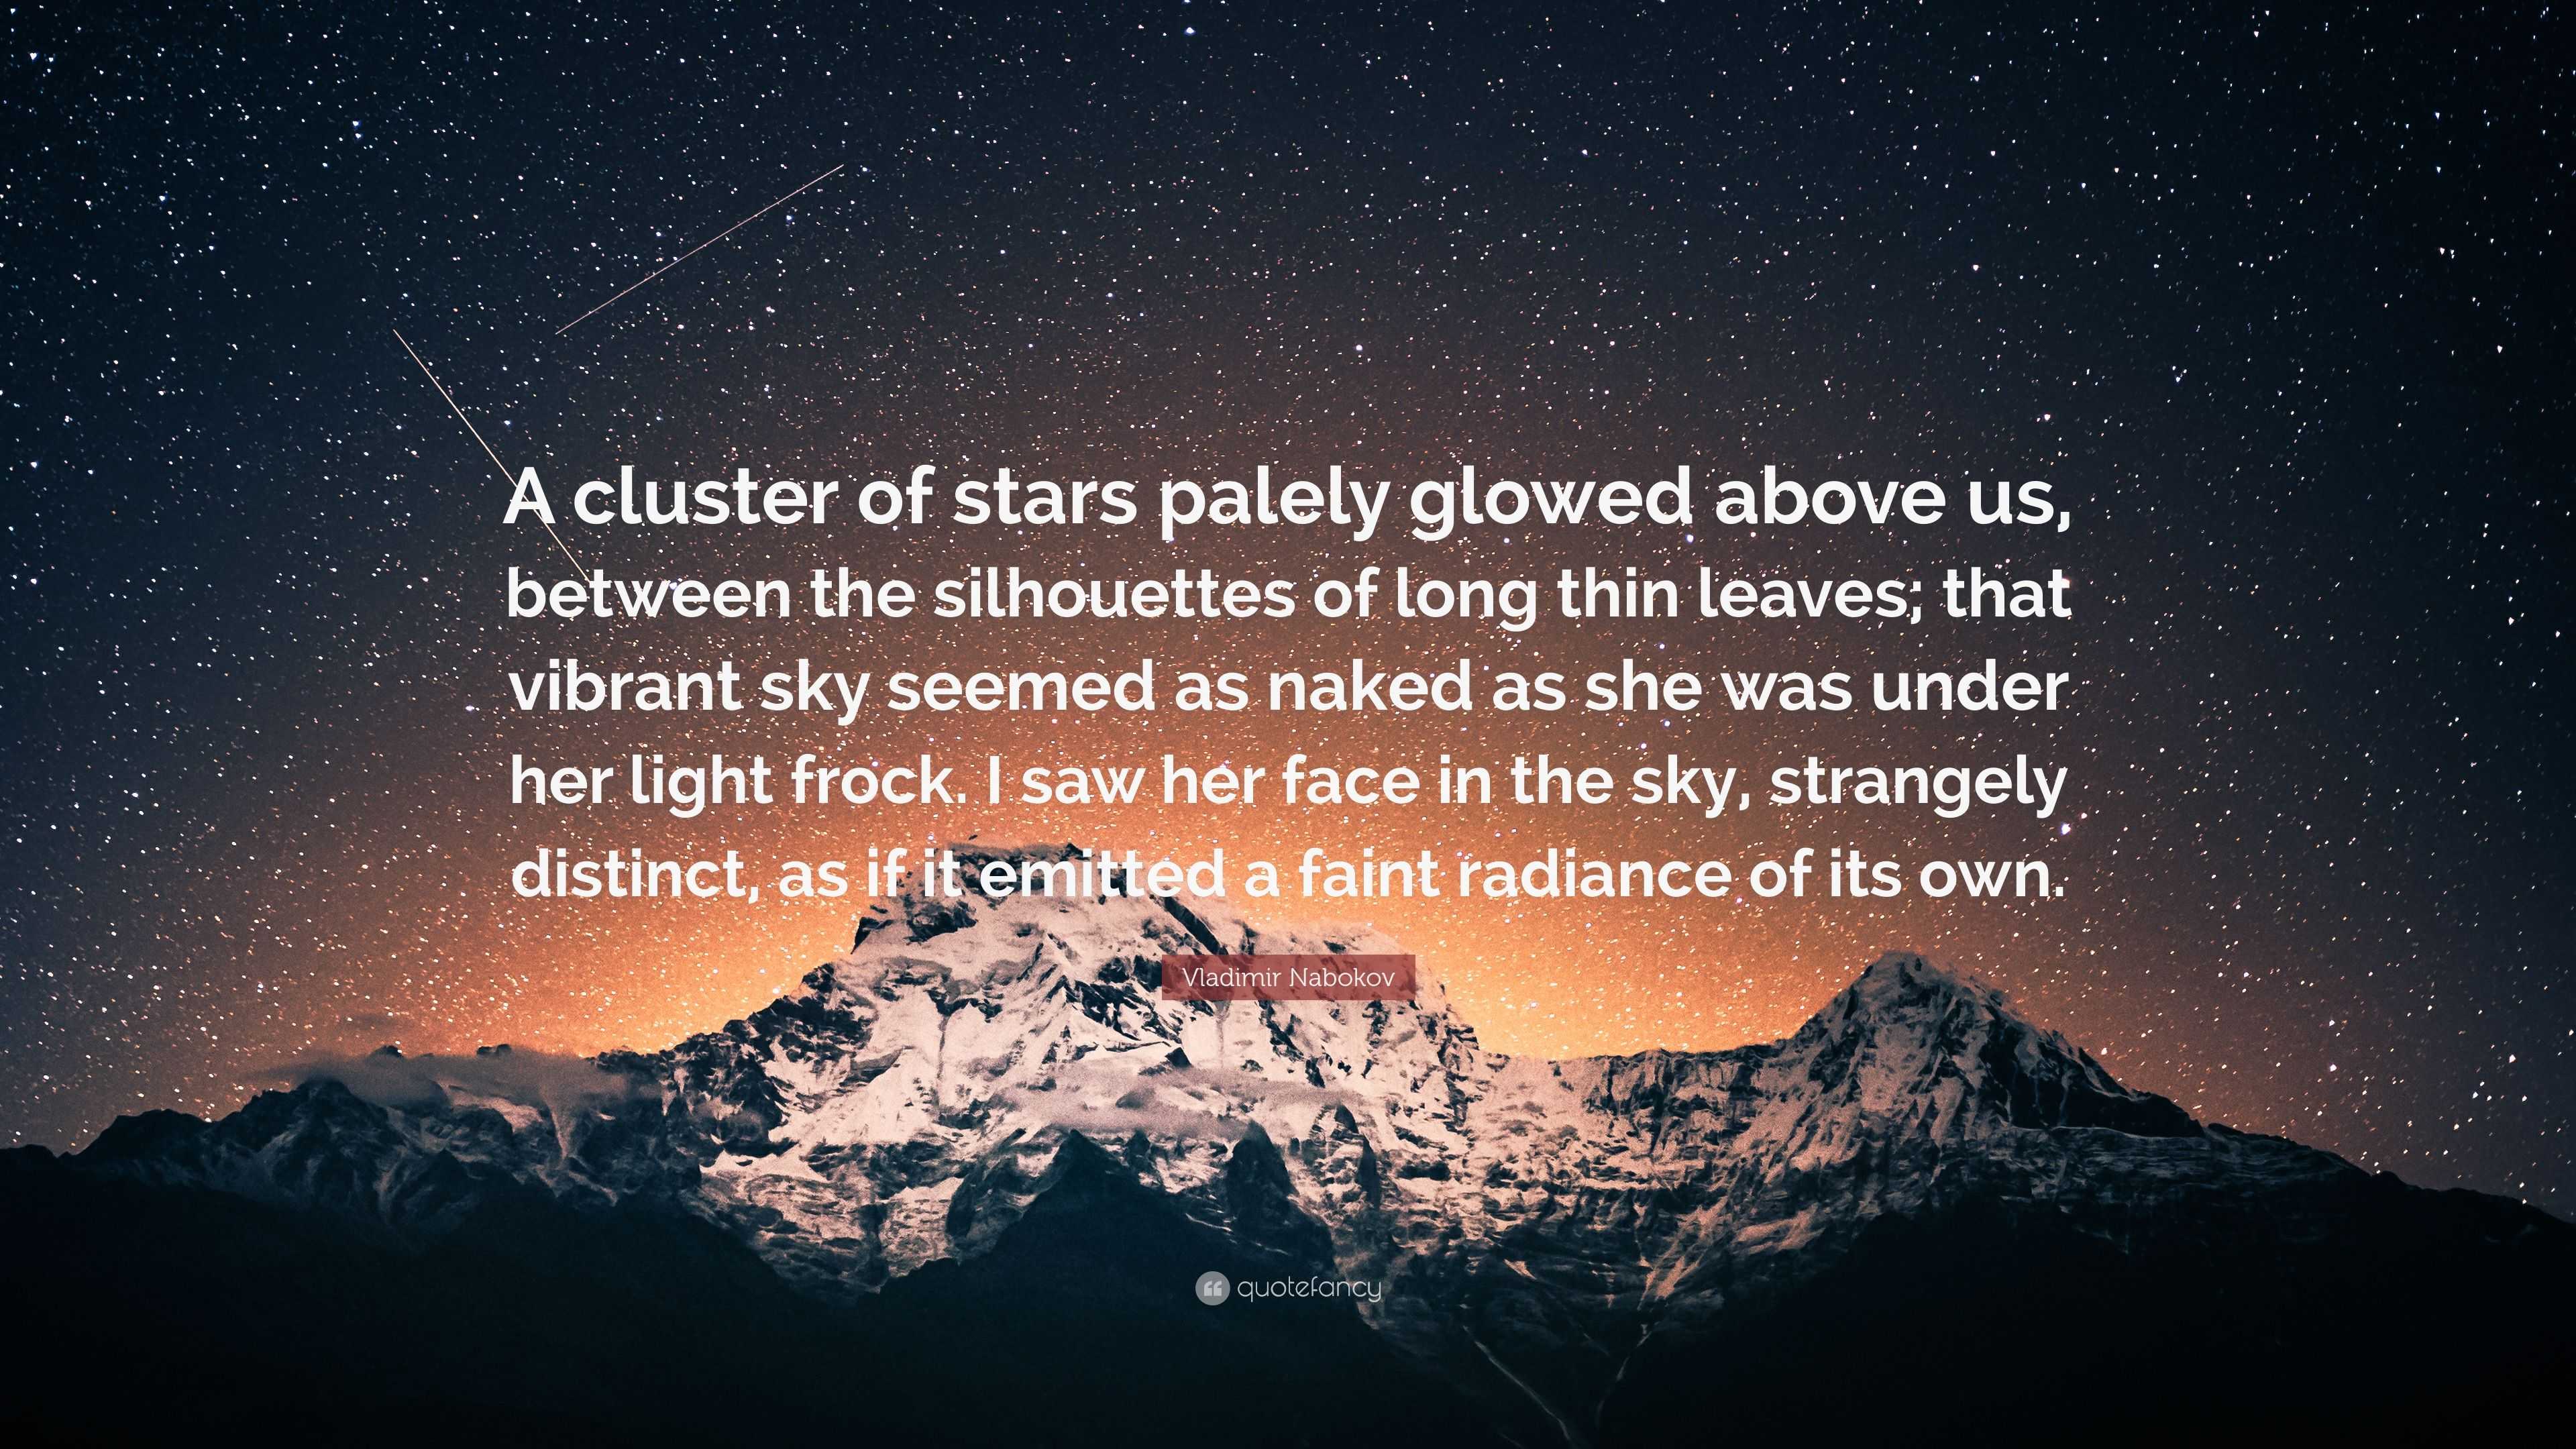 Vladimir Nabokov Quote: “A cluster of stars palely glowed above us, between the silhouettes of long thin leaves; vibrant sky seemed as naked...”